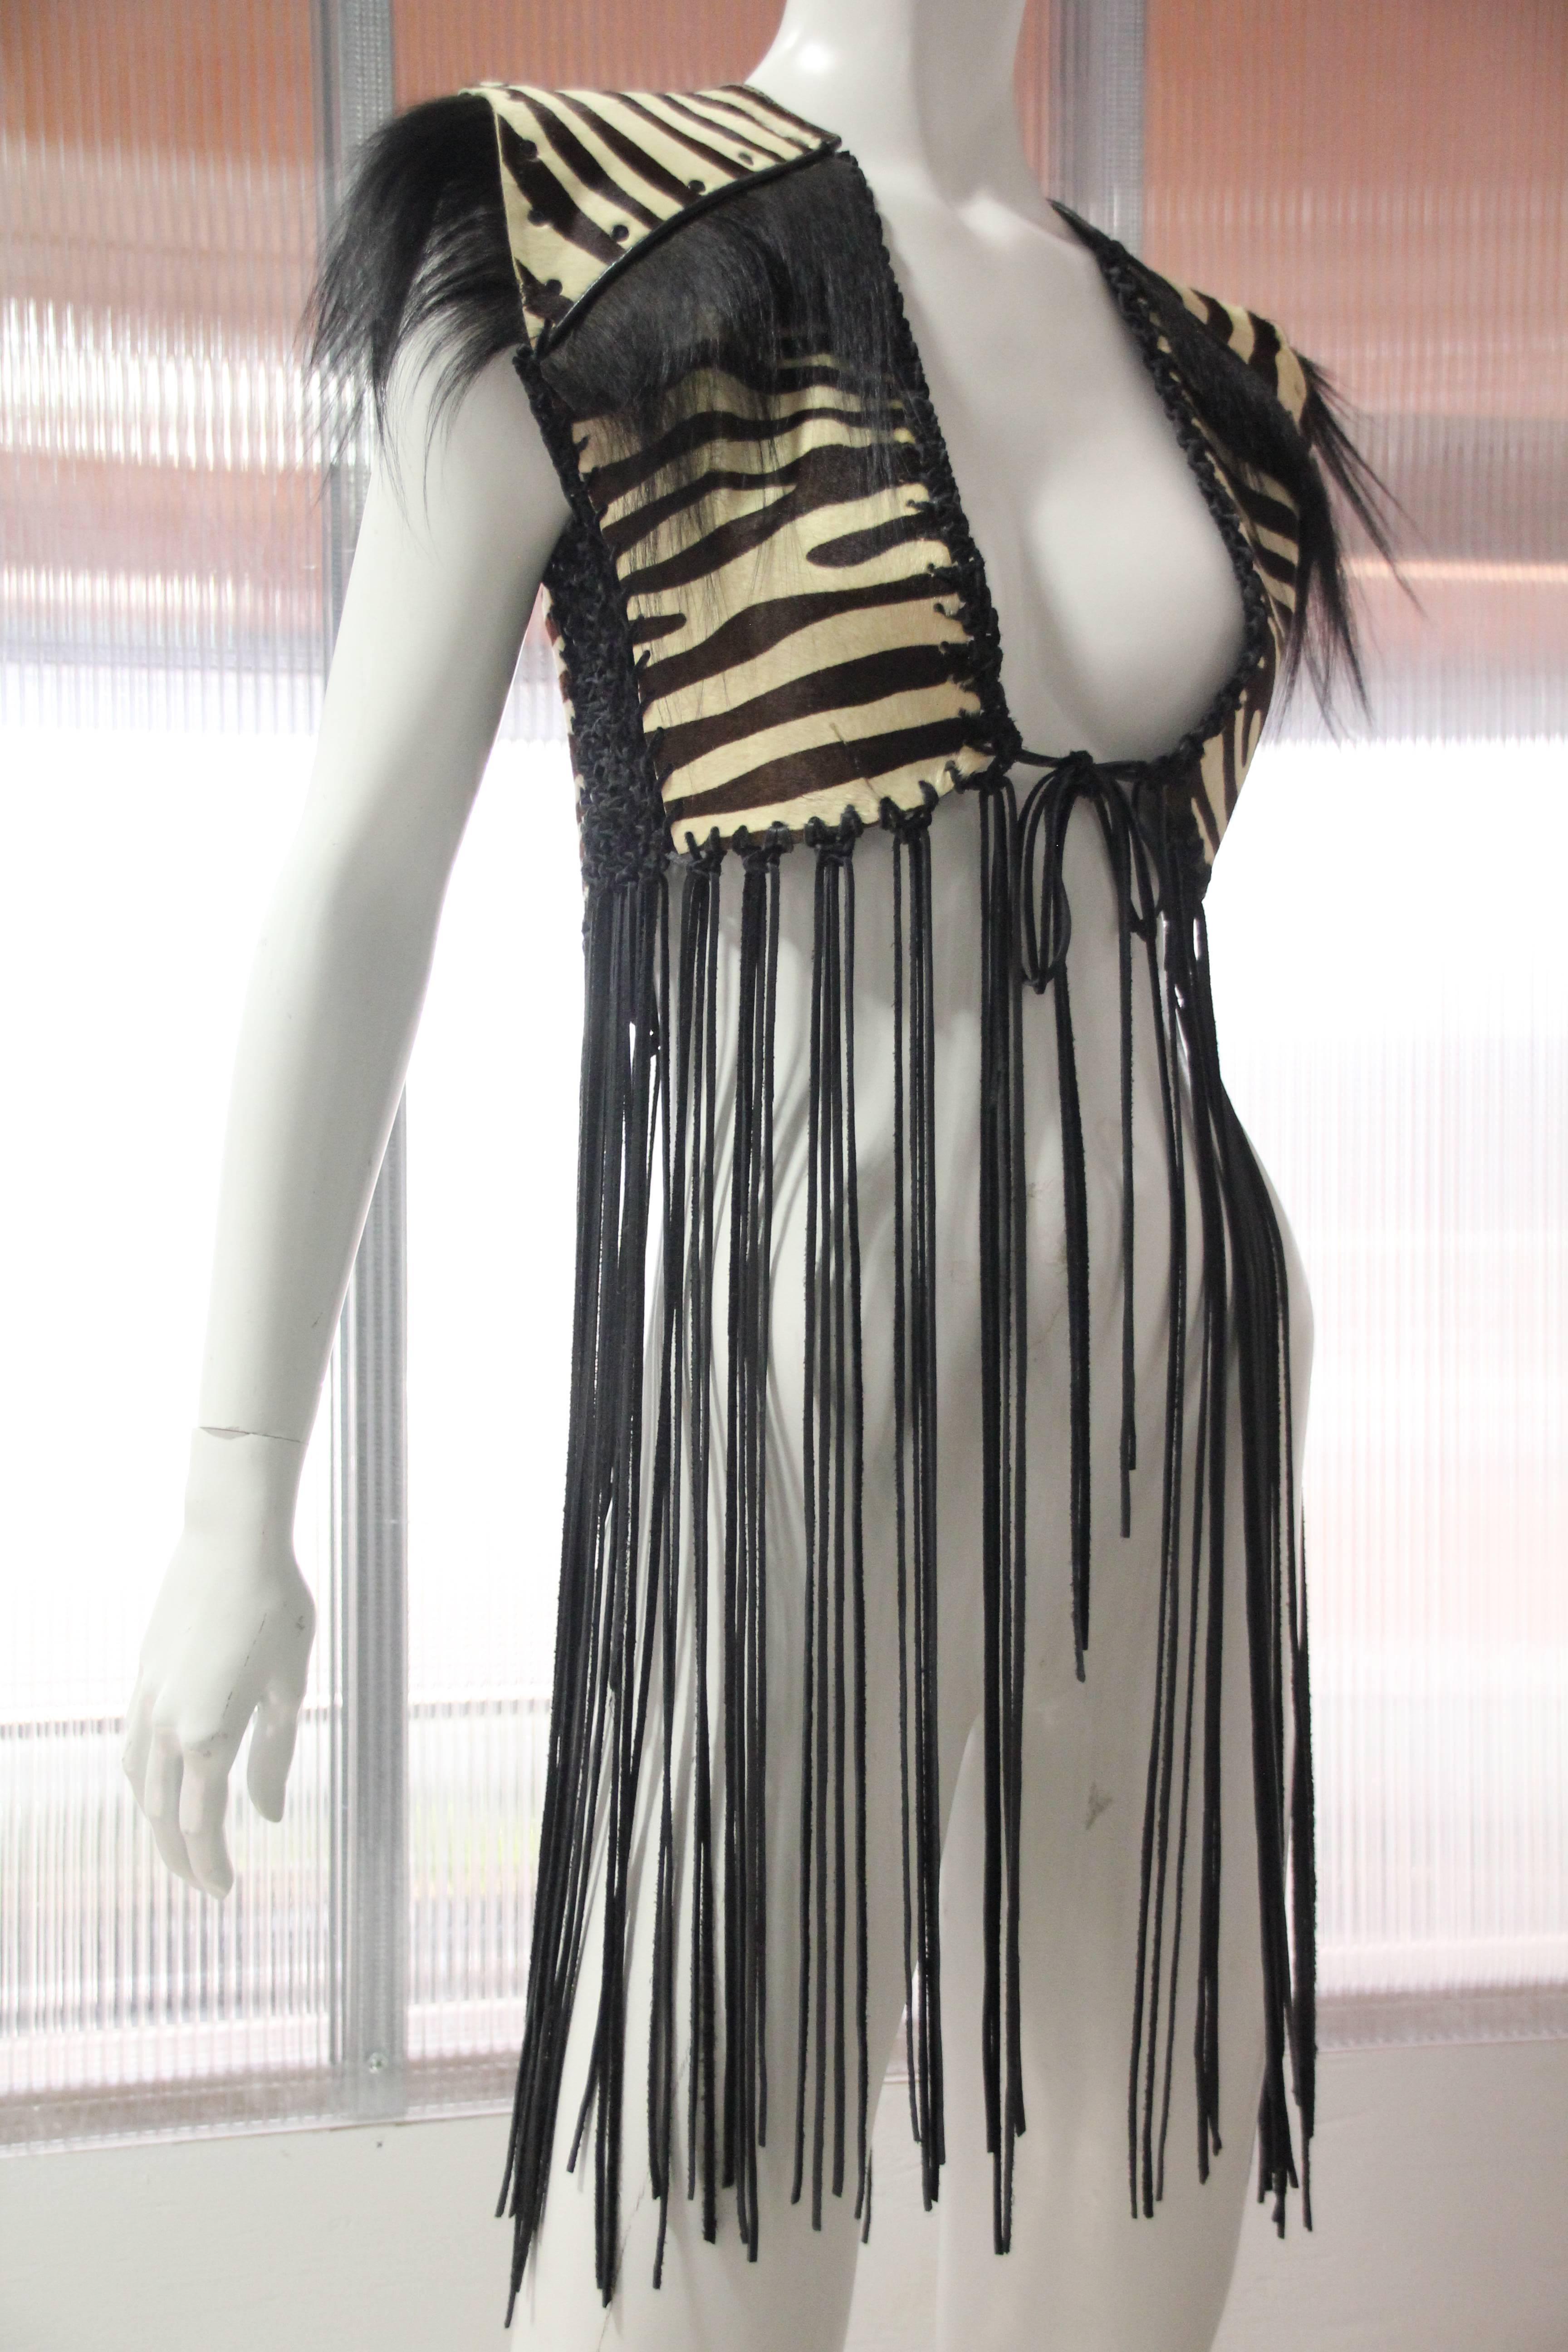 1970s-Style custom-made zebra-stenciled calf skin vest w leather cord fringe, leather macrame insets, metal studs and monkey fur trim. Wow! 